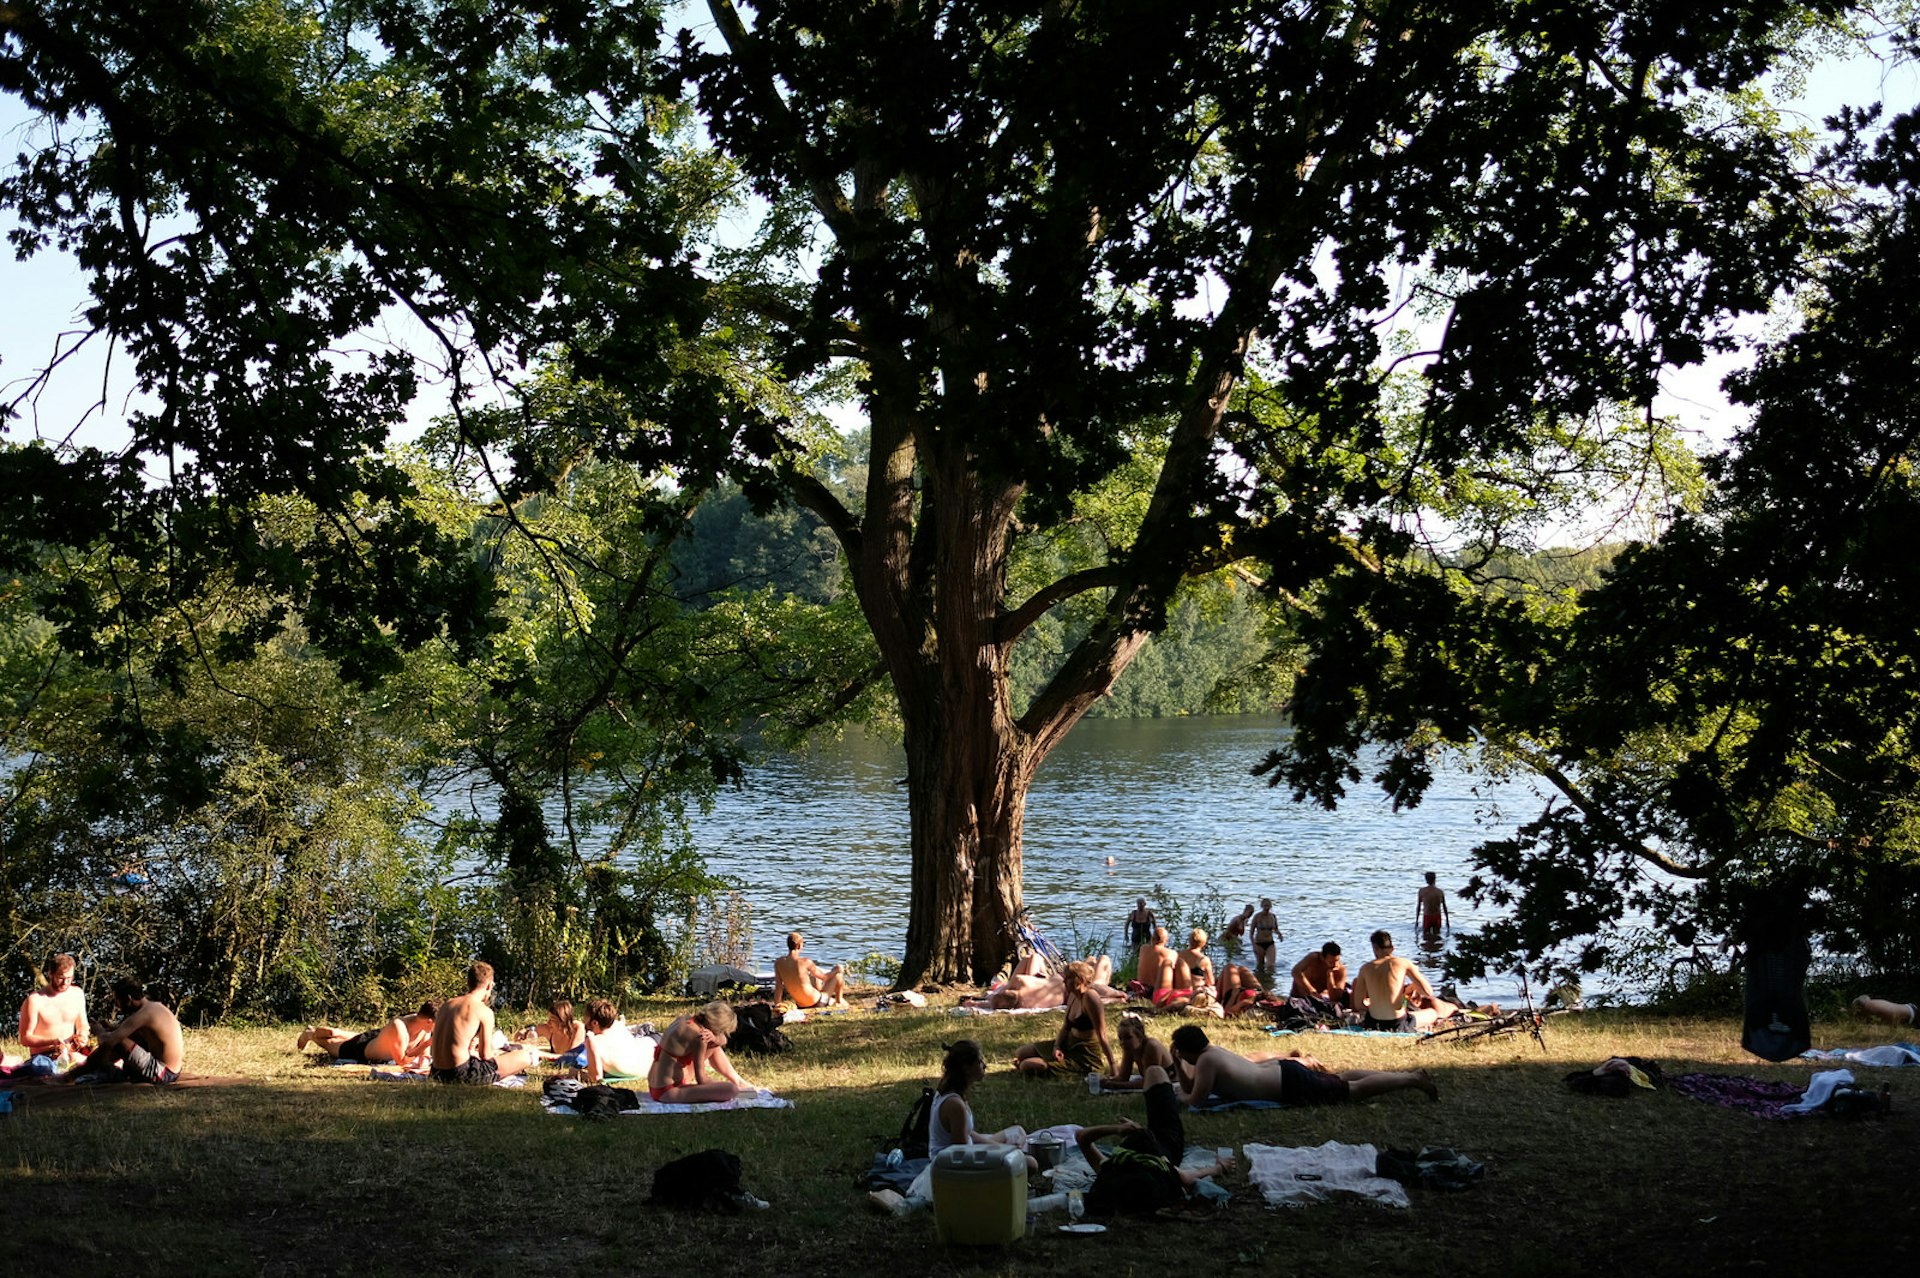 Free Berlin - People enjoying the hot summer weather at Tegeler See lake in Berlin, Germany. People lie on blankets in and out of the shade and a few are paddling in the lake